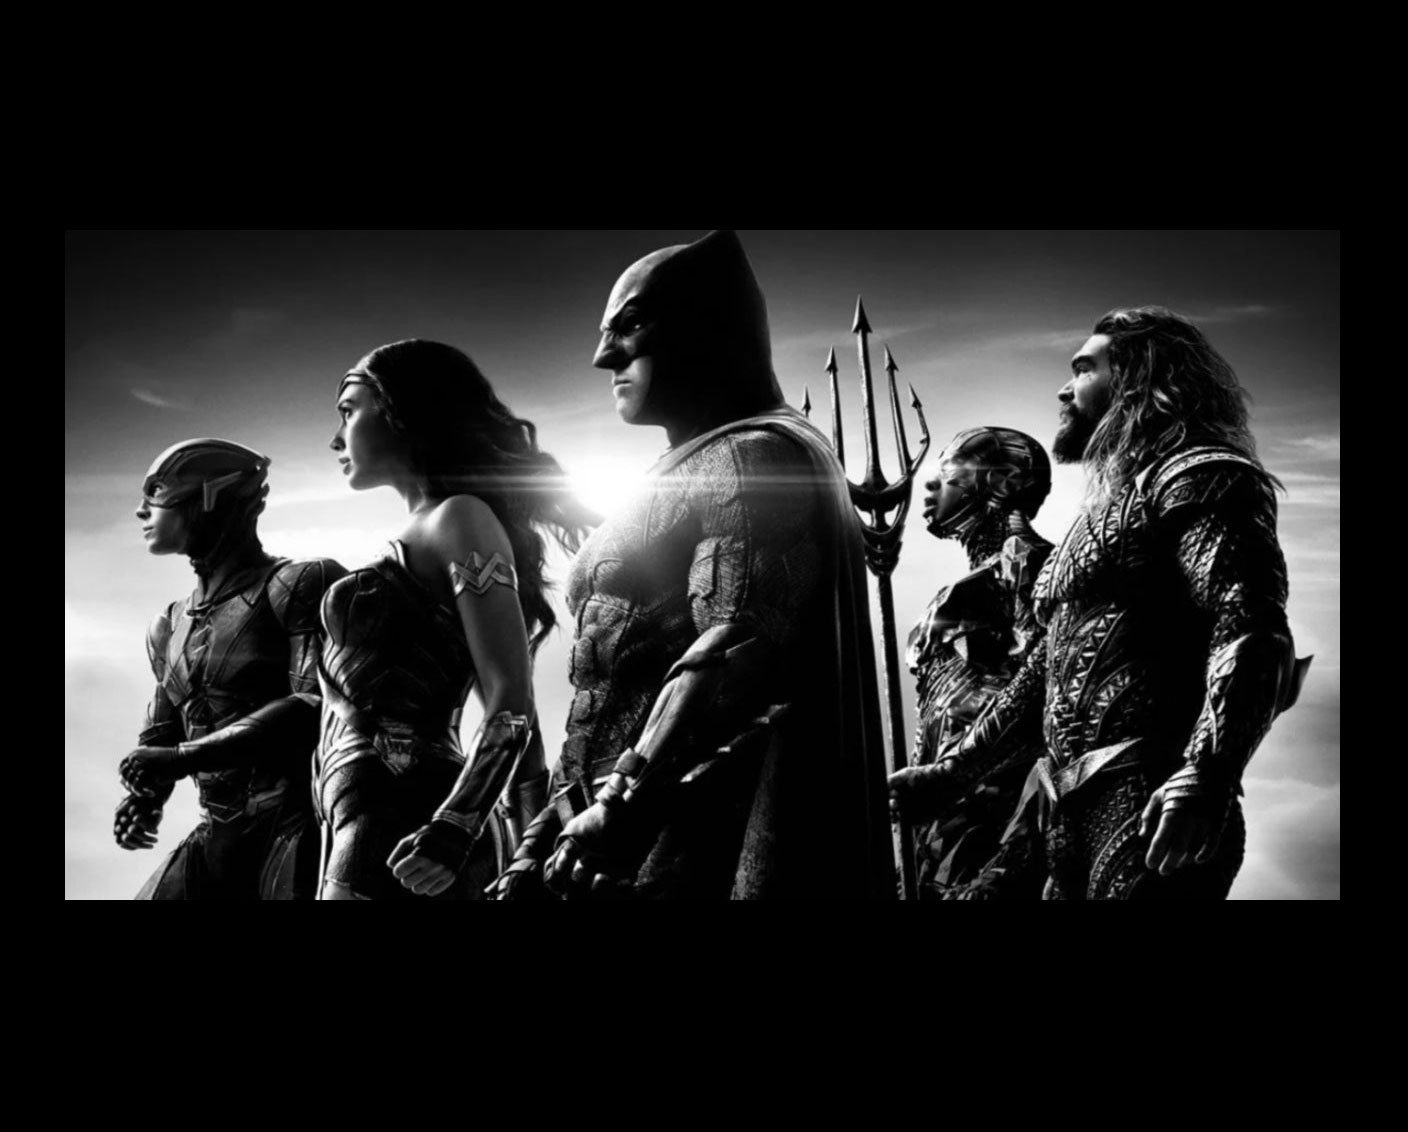 Zack Snyder's Justice League full official Trailer is here